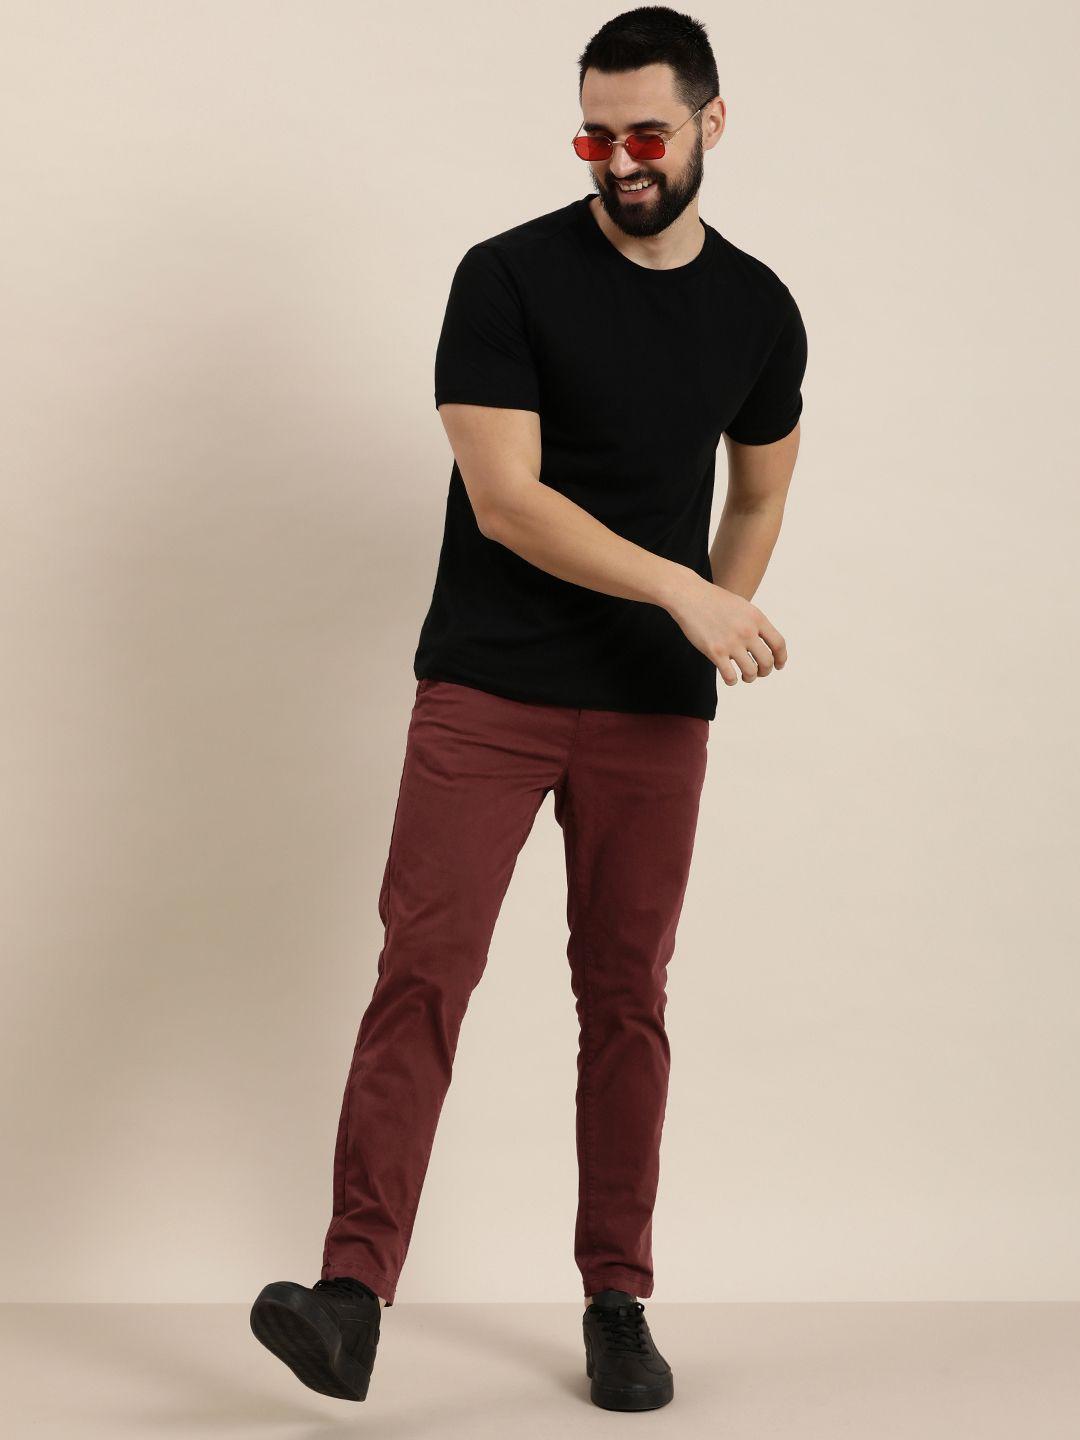 here&now men relaxed solid regular fit chinos trousers